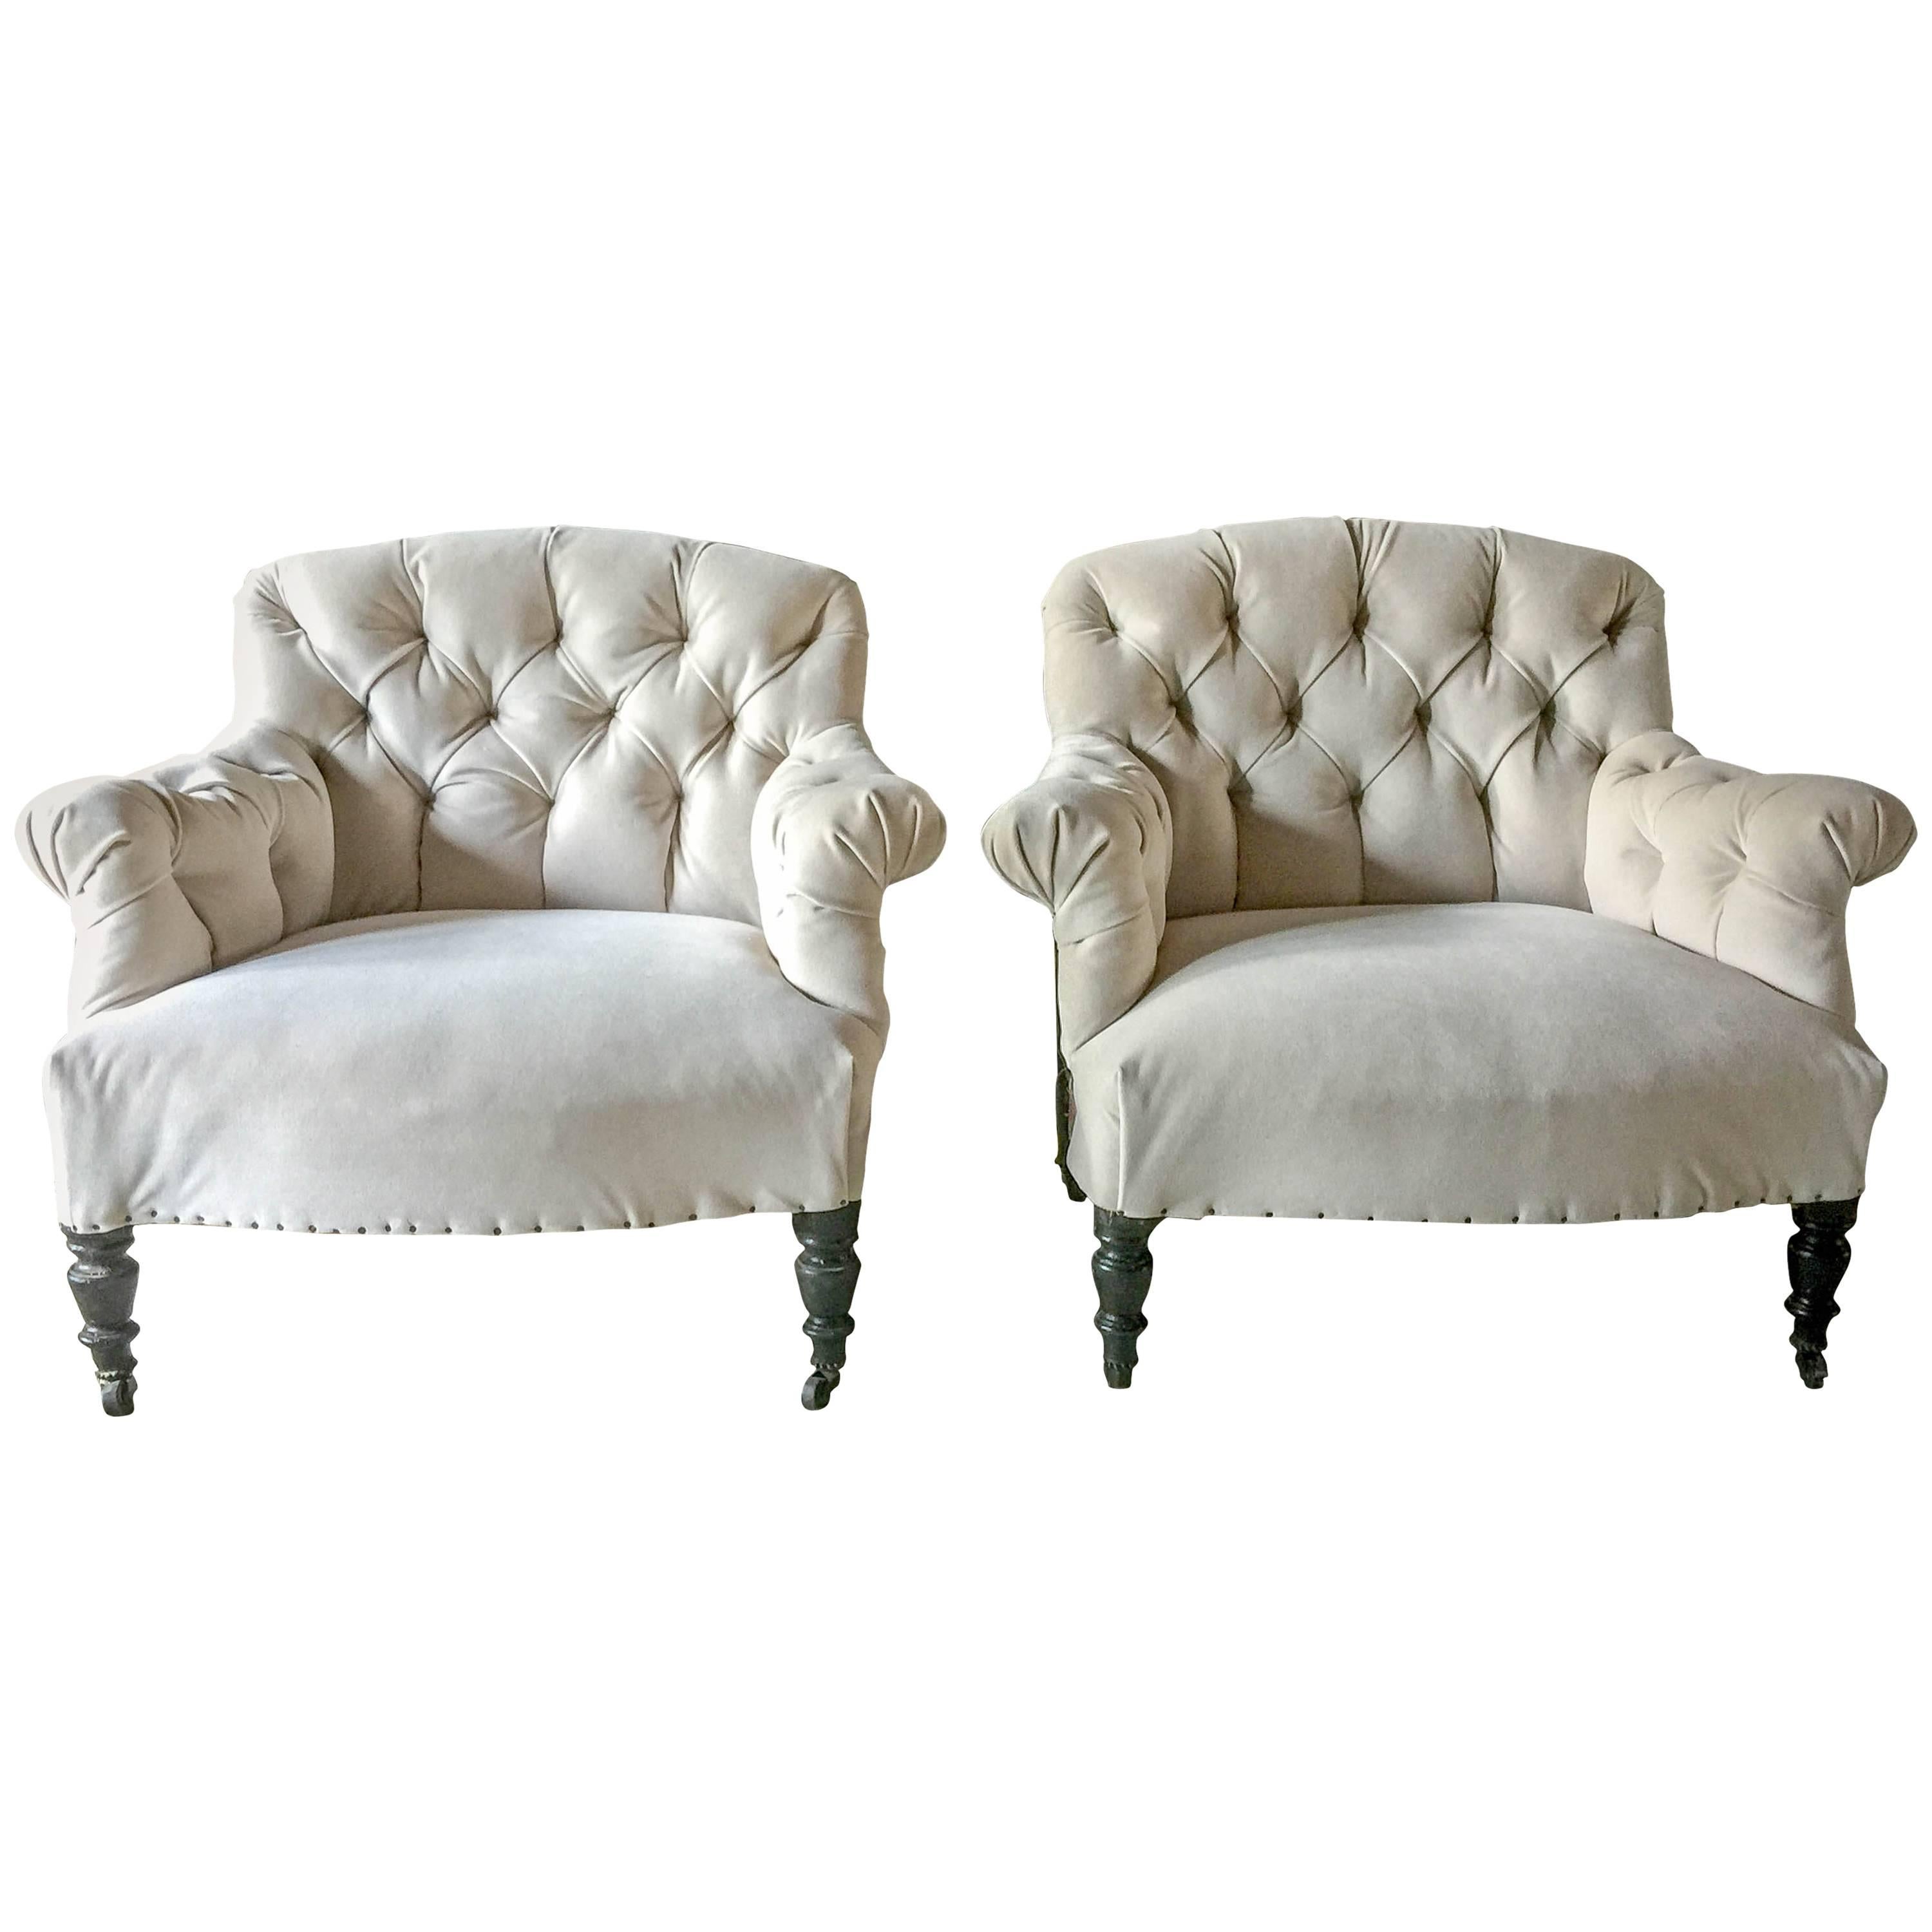 Pair of Antique French Tufted Salon Chairs